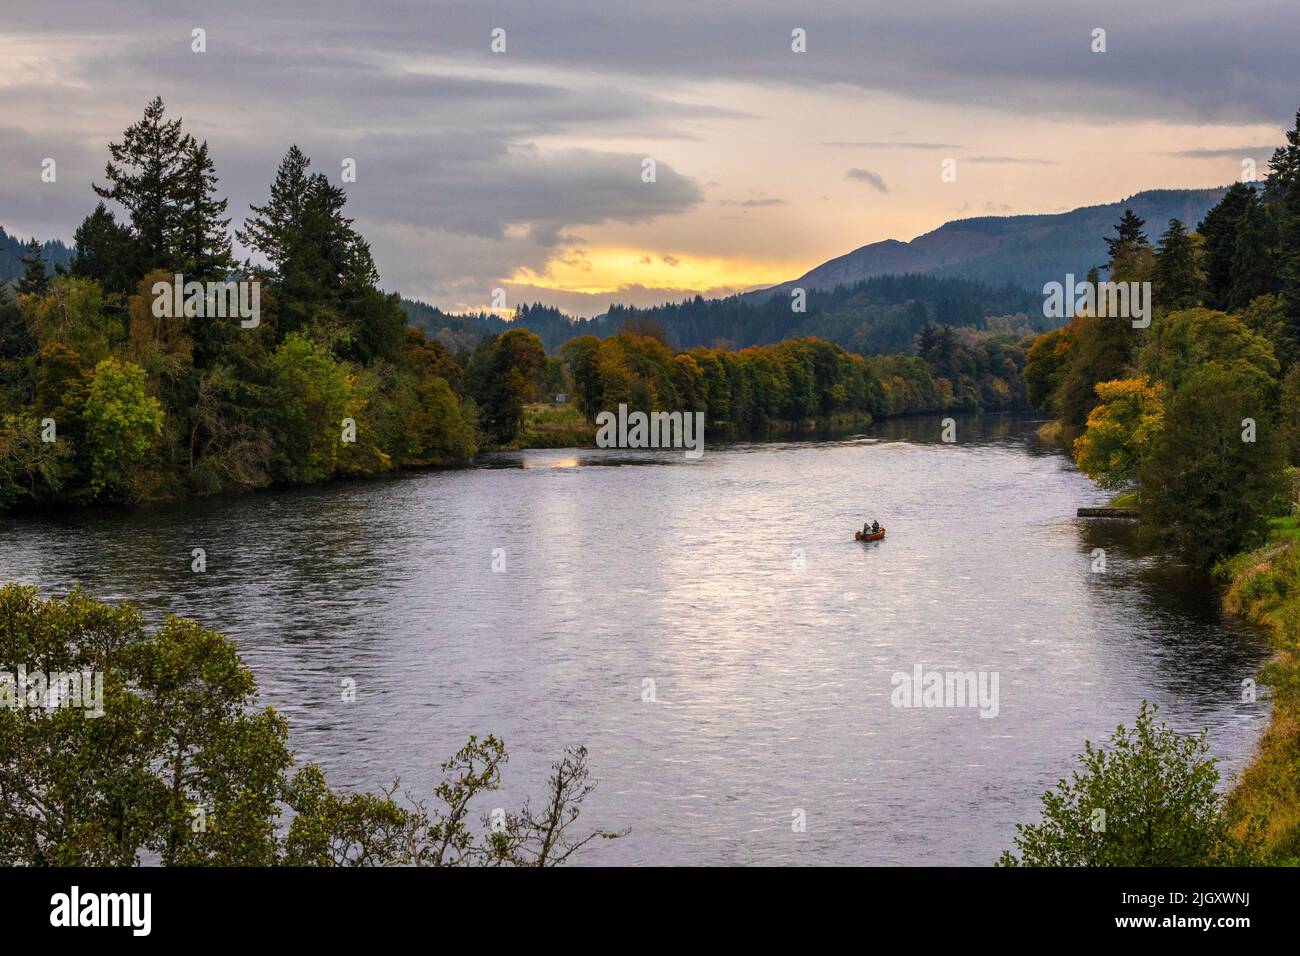 Dunkeld, Scotland - October 11th 2021: A view over the River Tay in the beautiful town of Dunkeld in Scotland, UK. Stock Photo